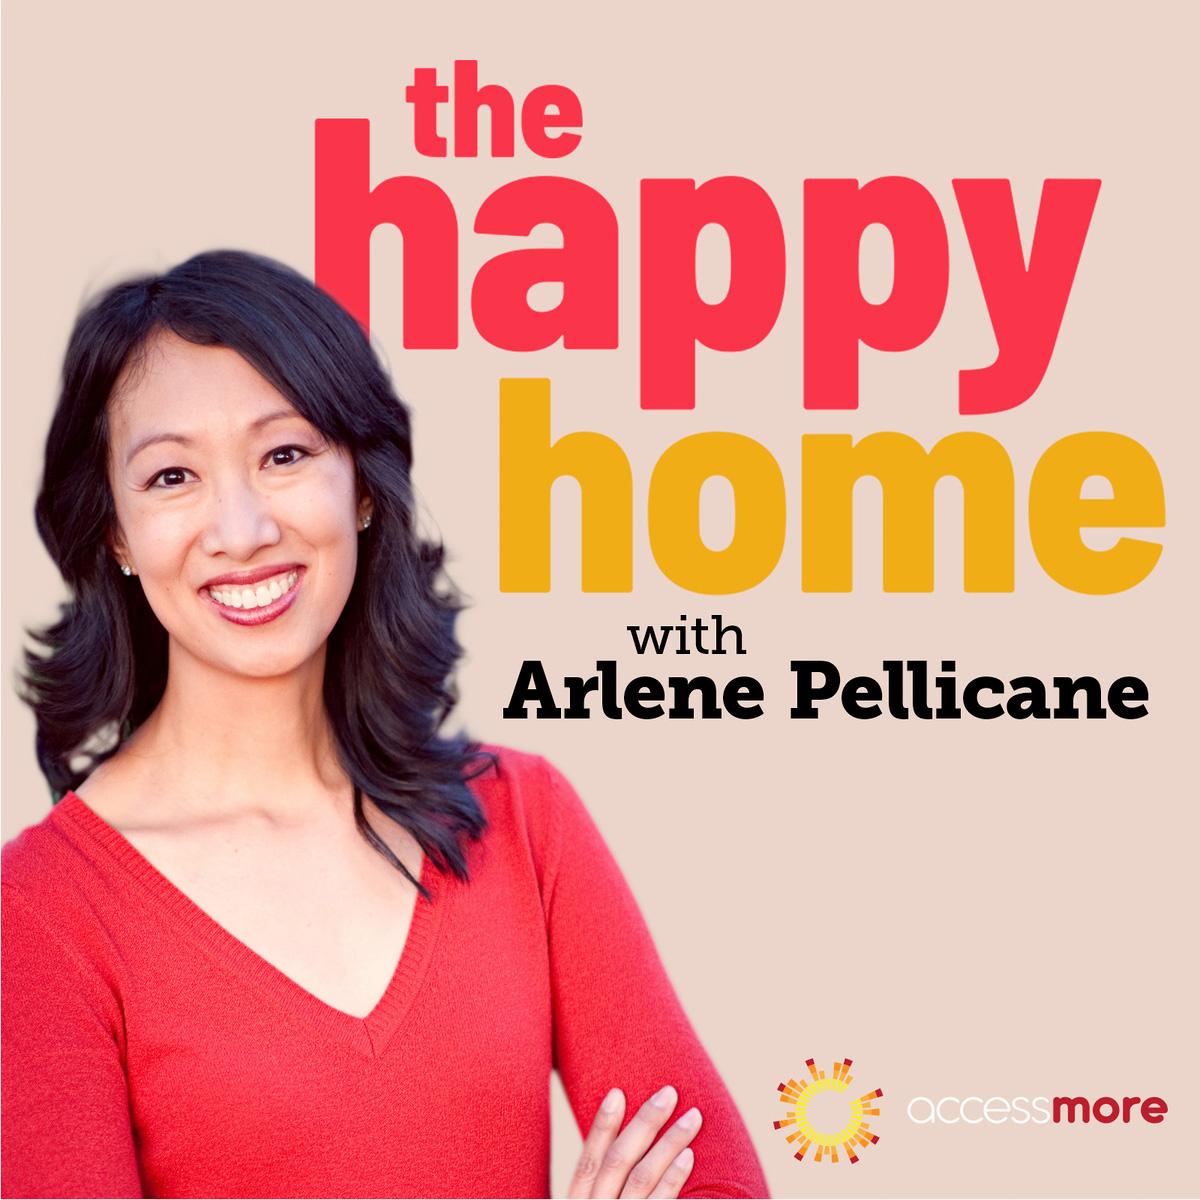 This show is for women and men who want a happier home life. Arlene will help you bridge the gap between your ideal family and the real thing. You don't have to come from a happy home to create one.